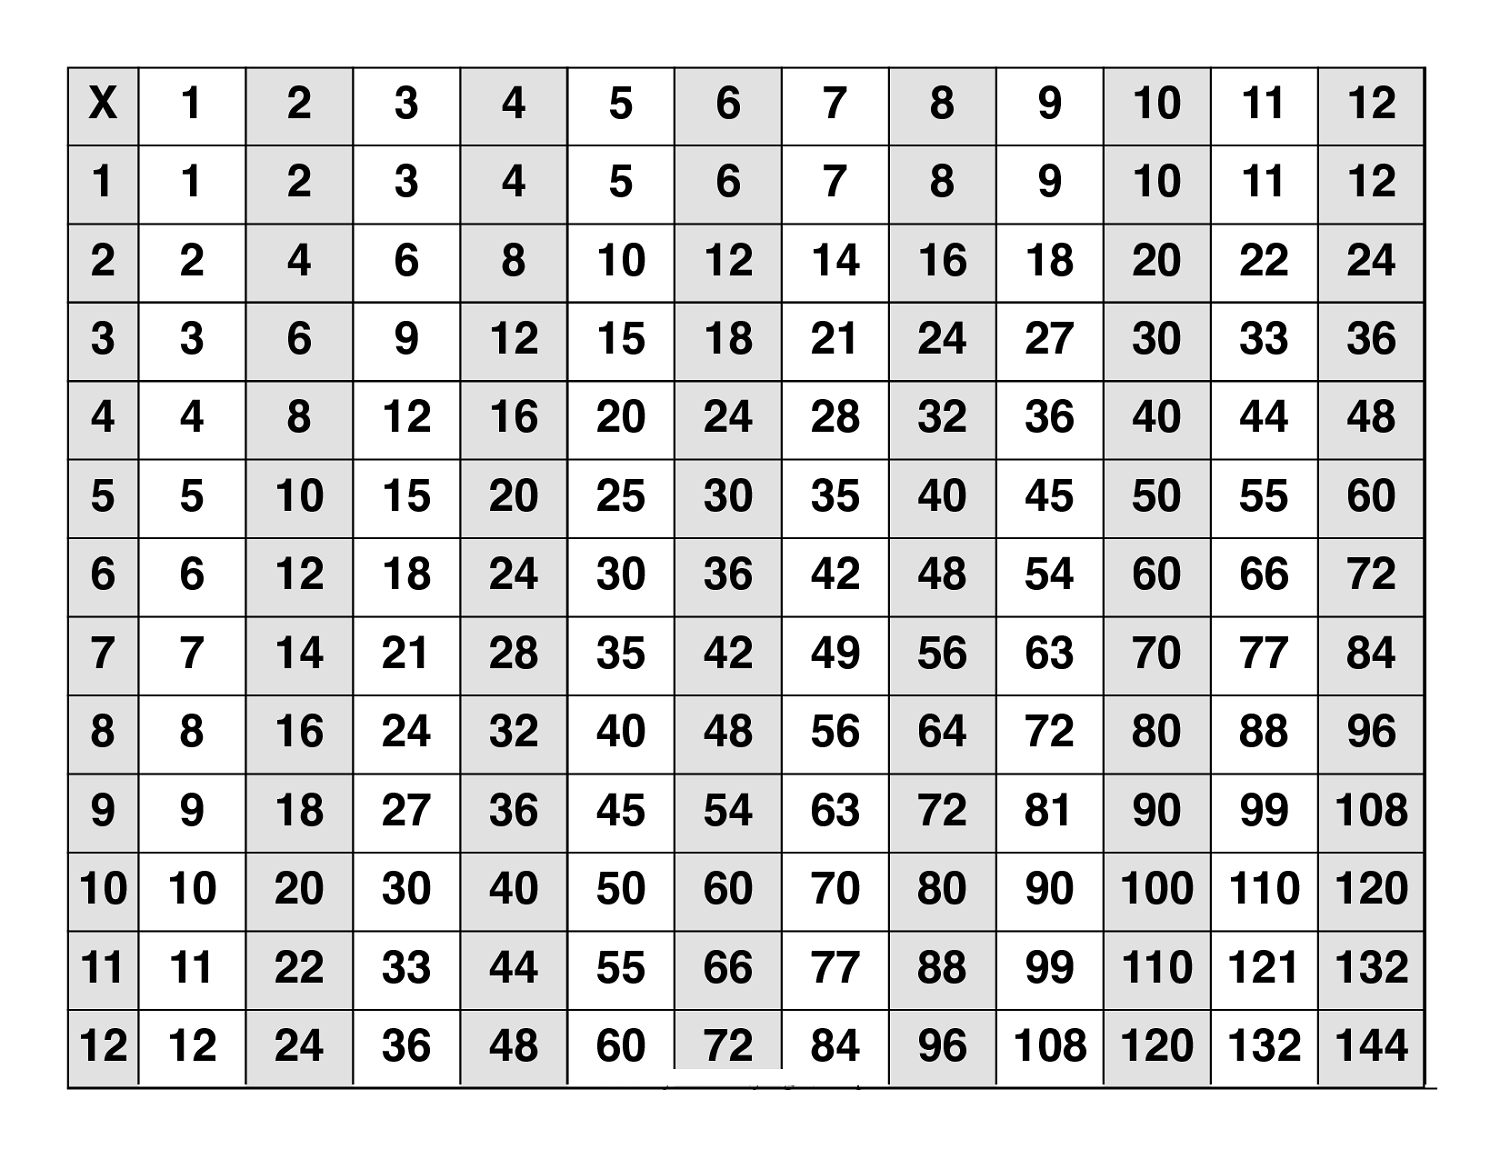 Large Multiplication Table To Train Memory 